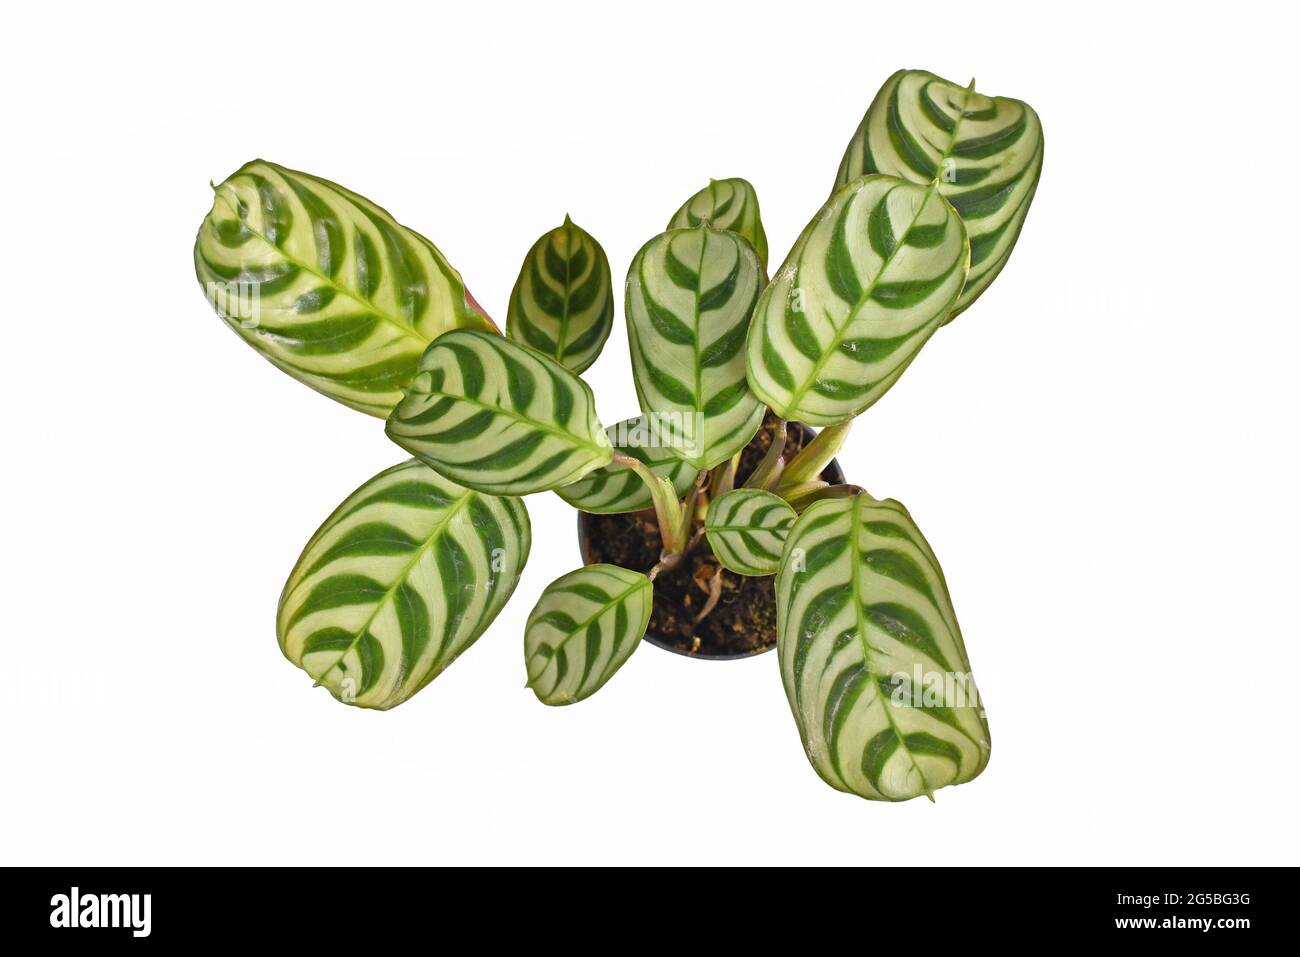 Top view of tropical 'Ctenanthe Burle Marxii' house plant with exotic stripe pattern on leaves in flower pot isolated on white background Stock Photo